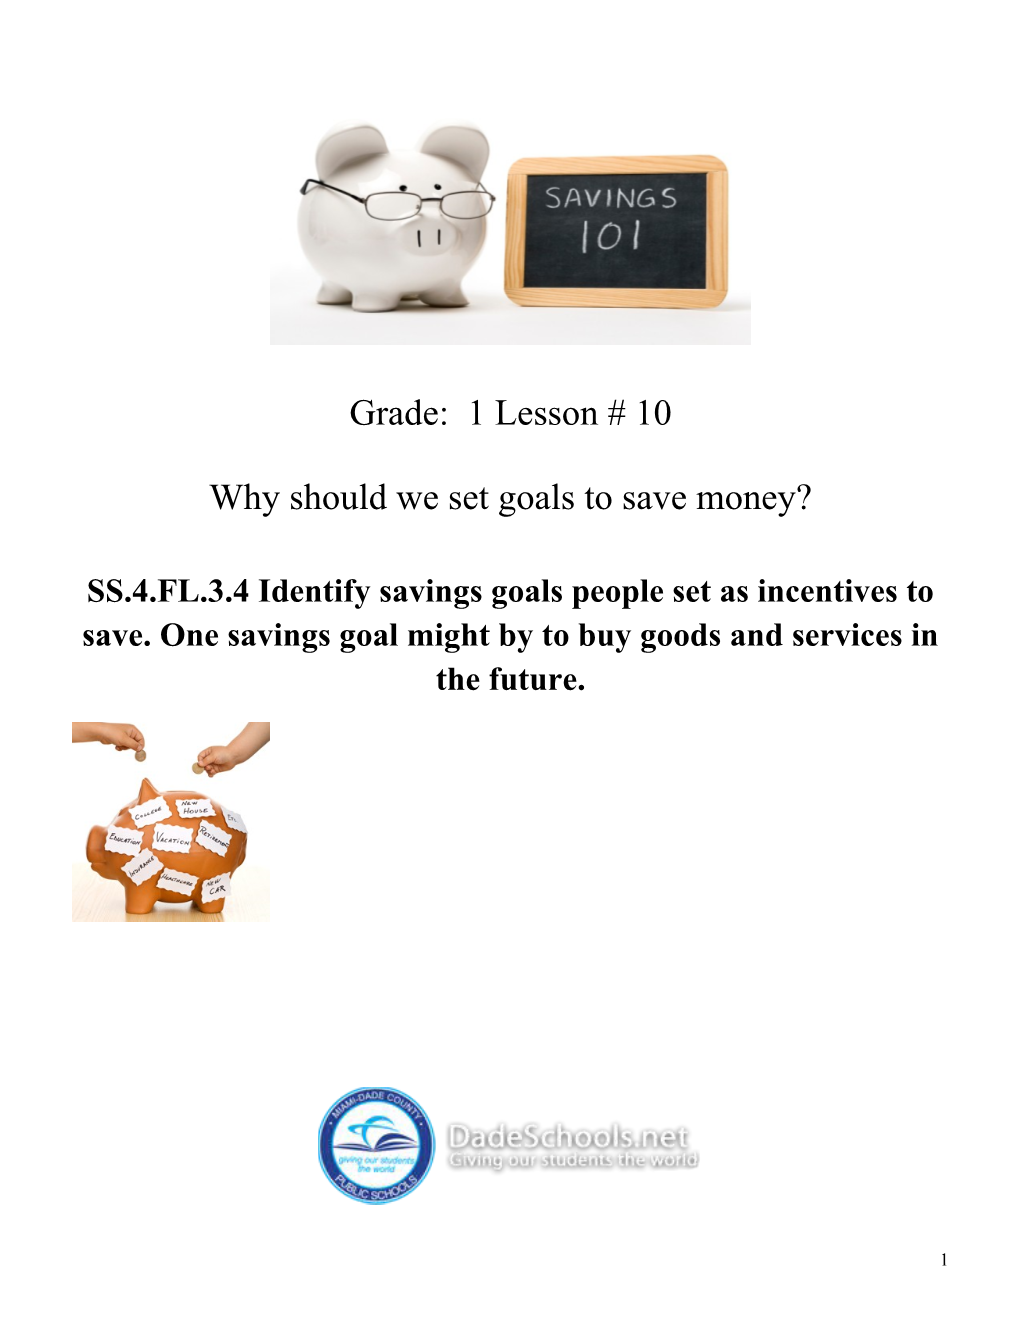 Why Should We Set Goals to Save Money?